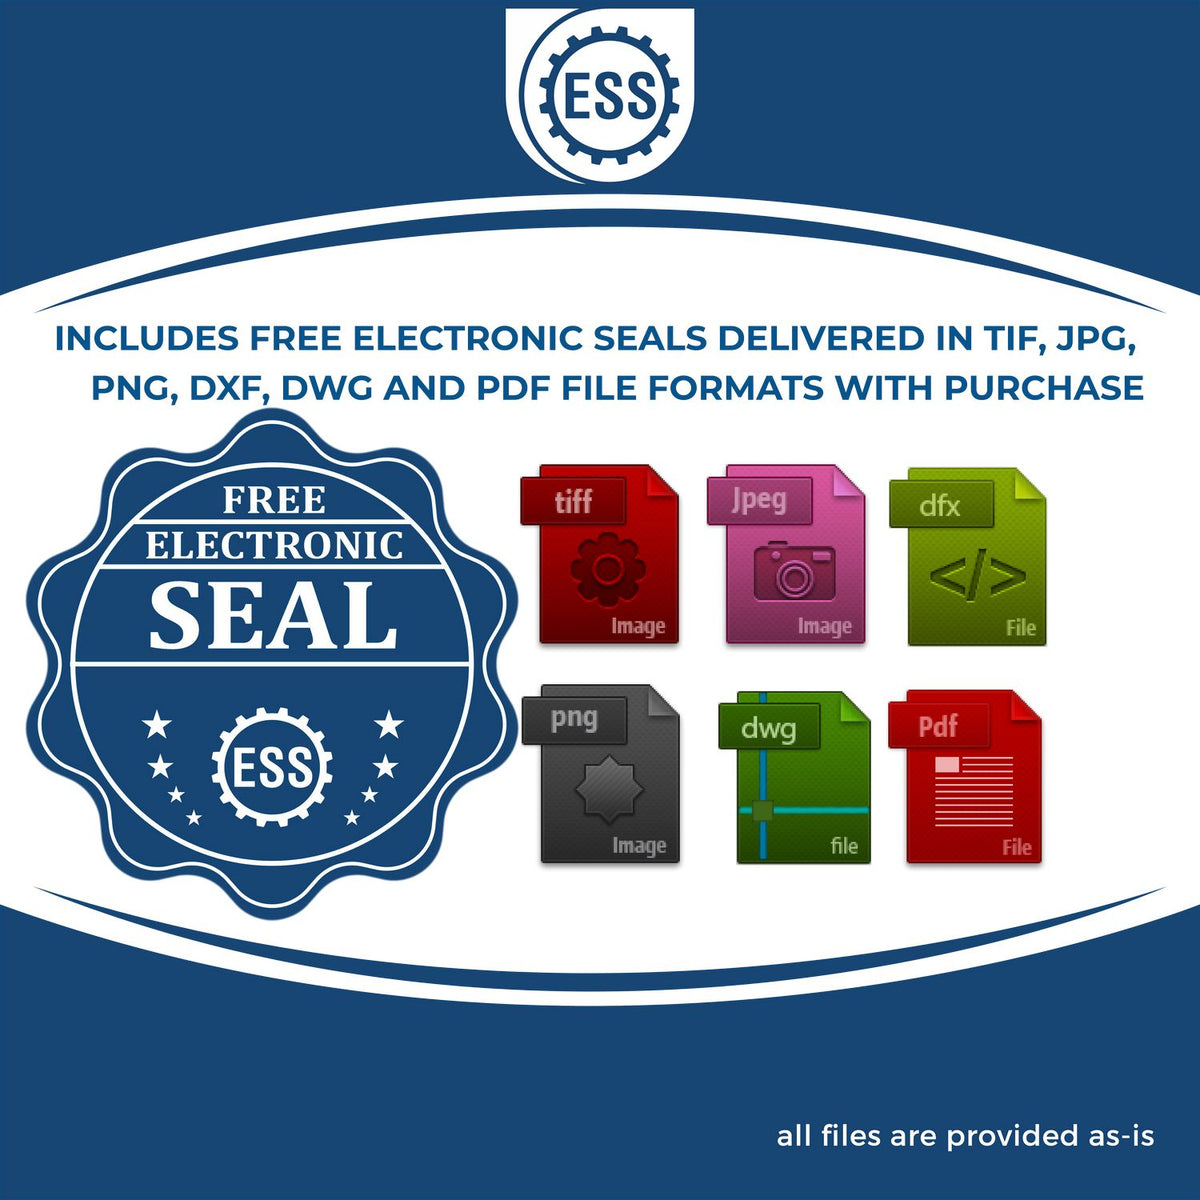 An infographic for the free electronic seal for the Long Reach Illinois PE Seal illustrating the different file type icons such as DXF, DWG, TIF, JPG and PNG.